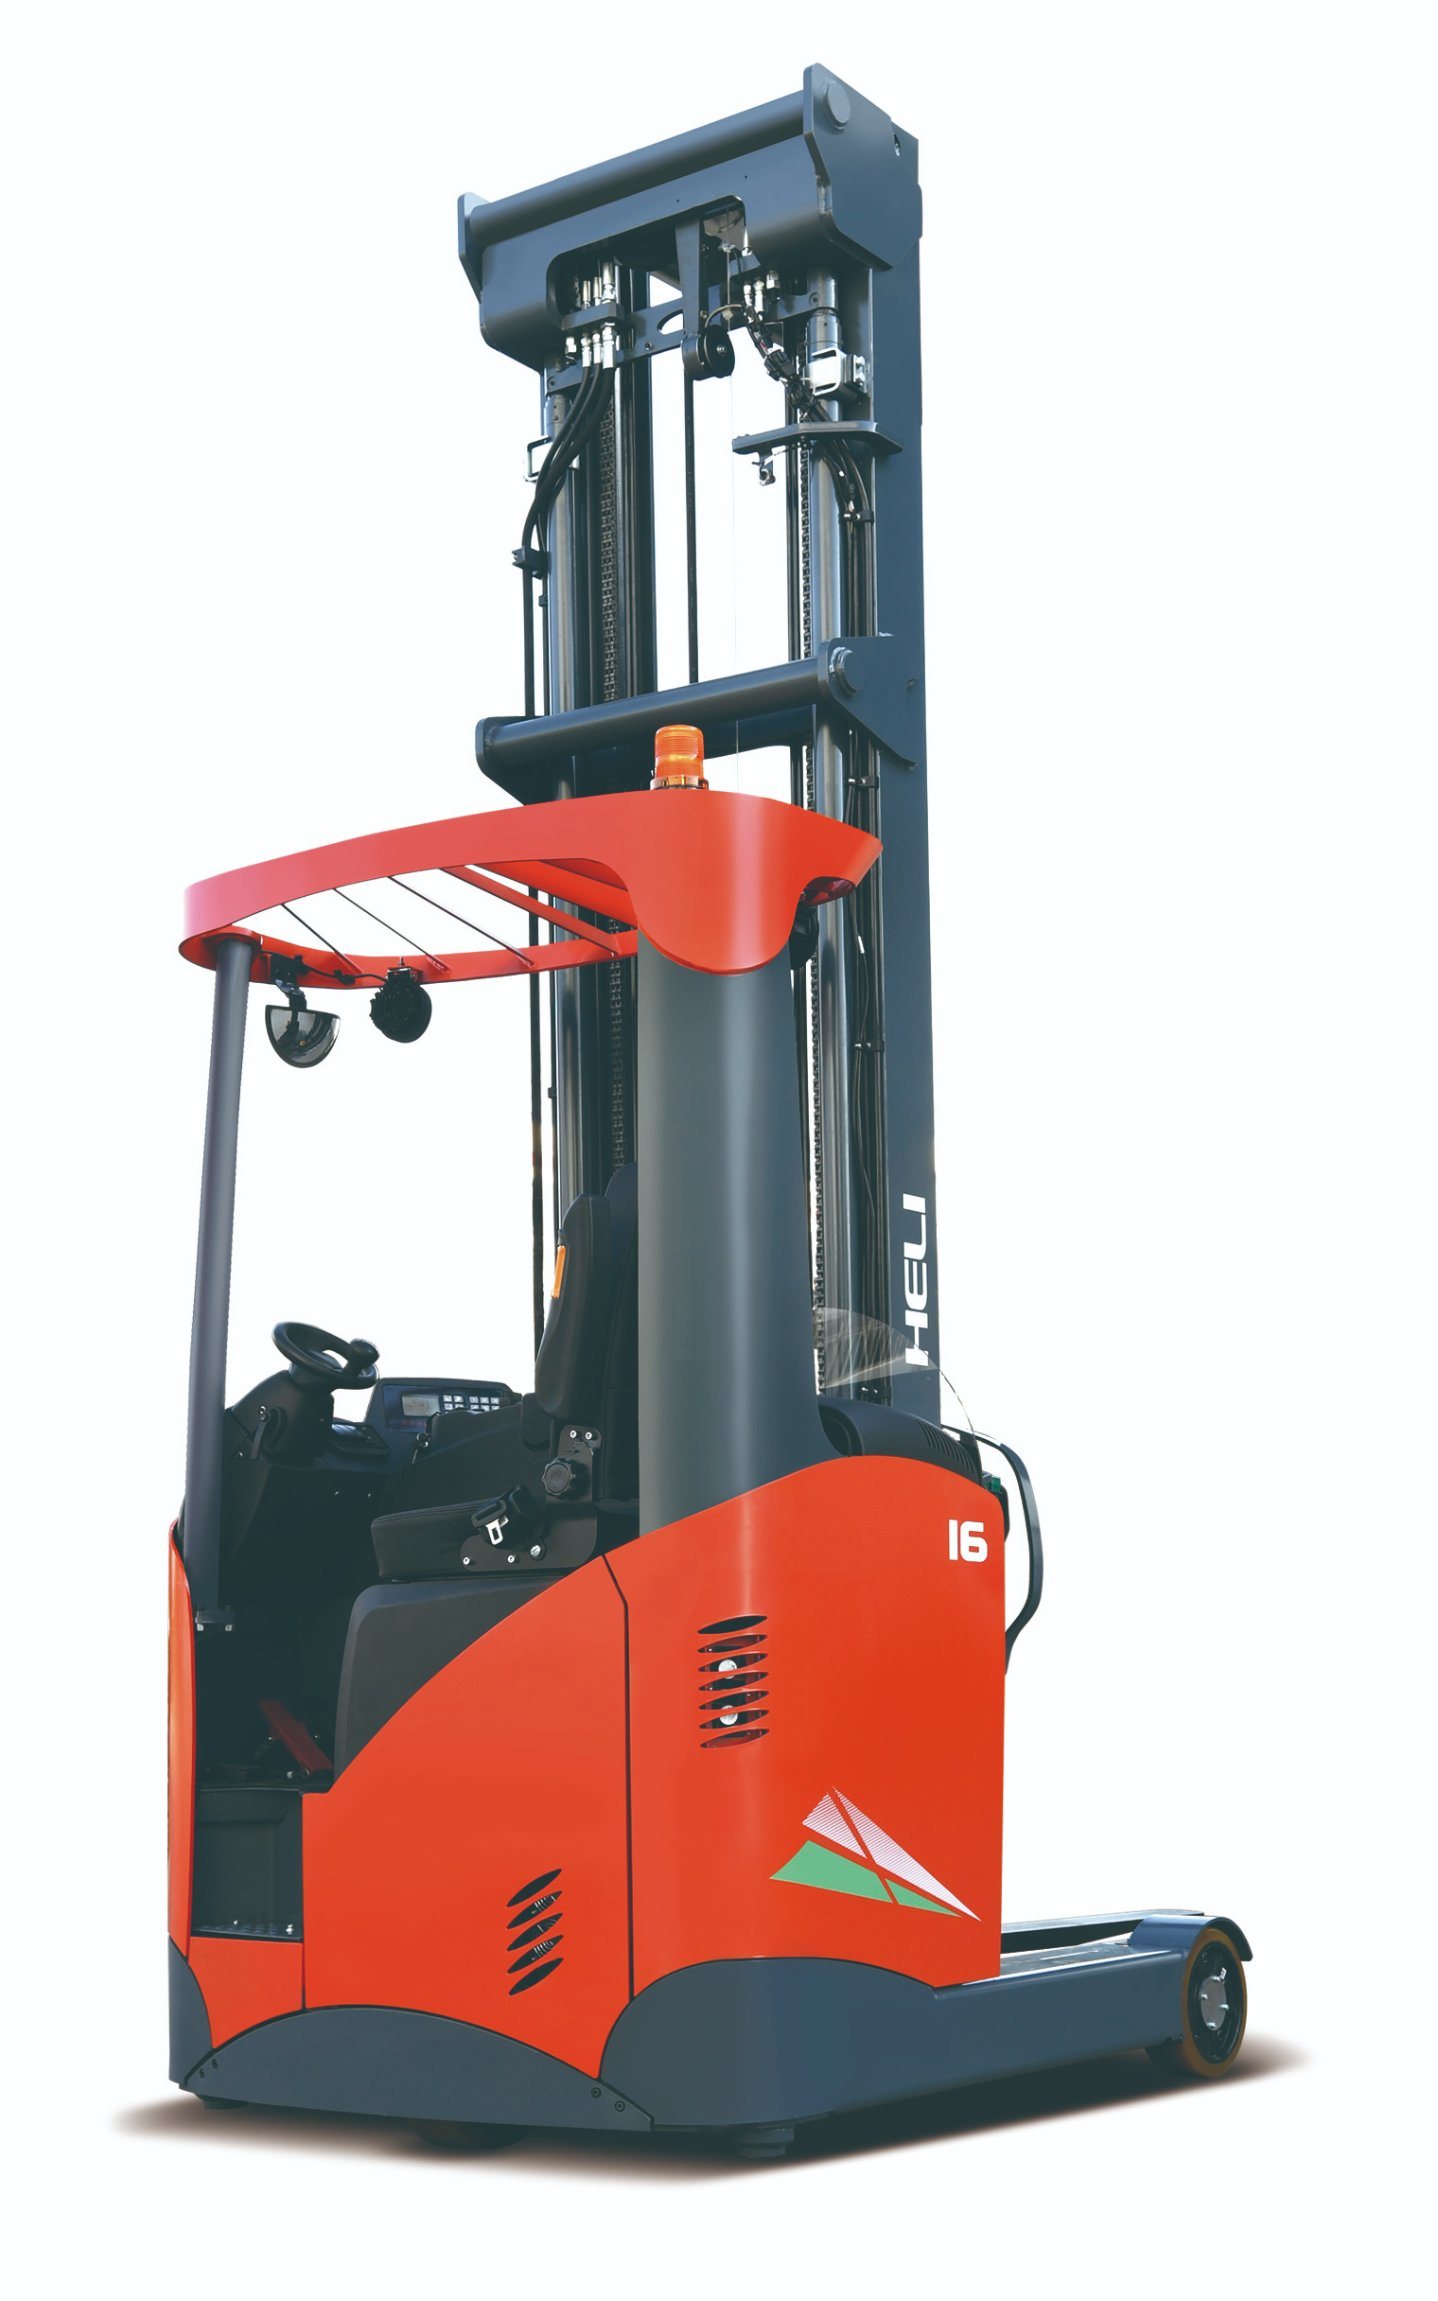 China Top Brand Heli 1.6t 1.8t 2t 3t 5t Warehouse Reach Truck Electric Forklift Cqd16